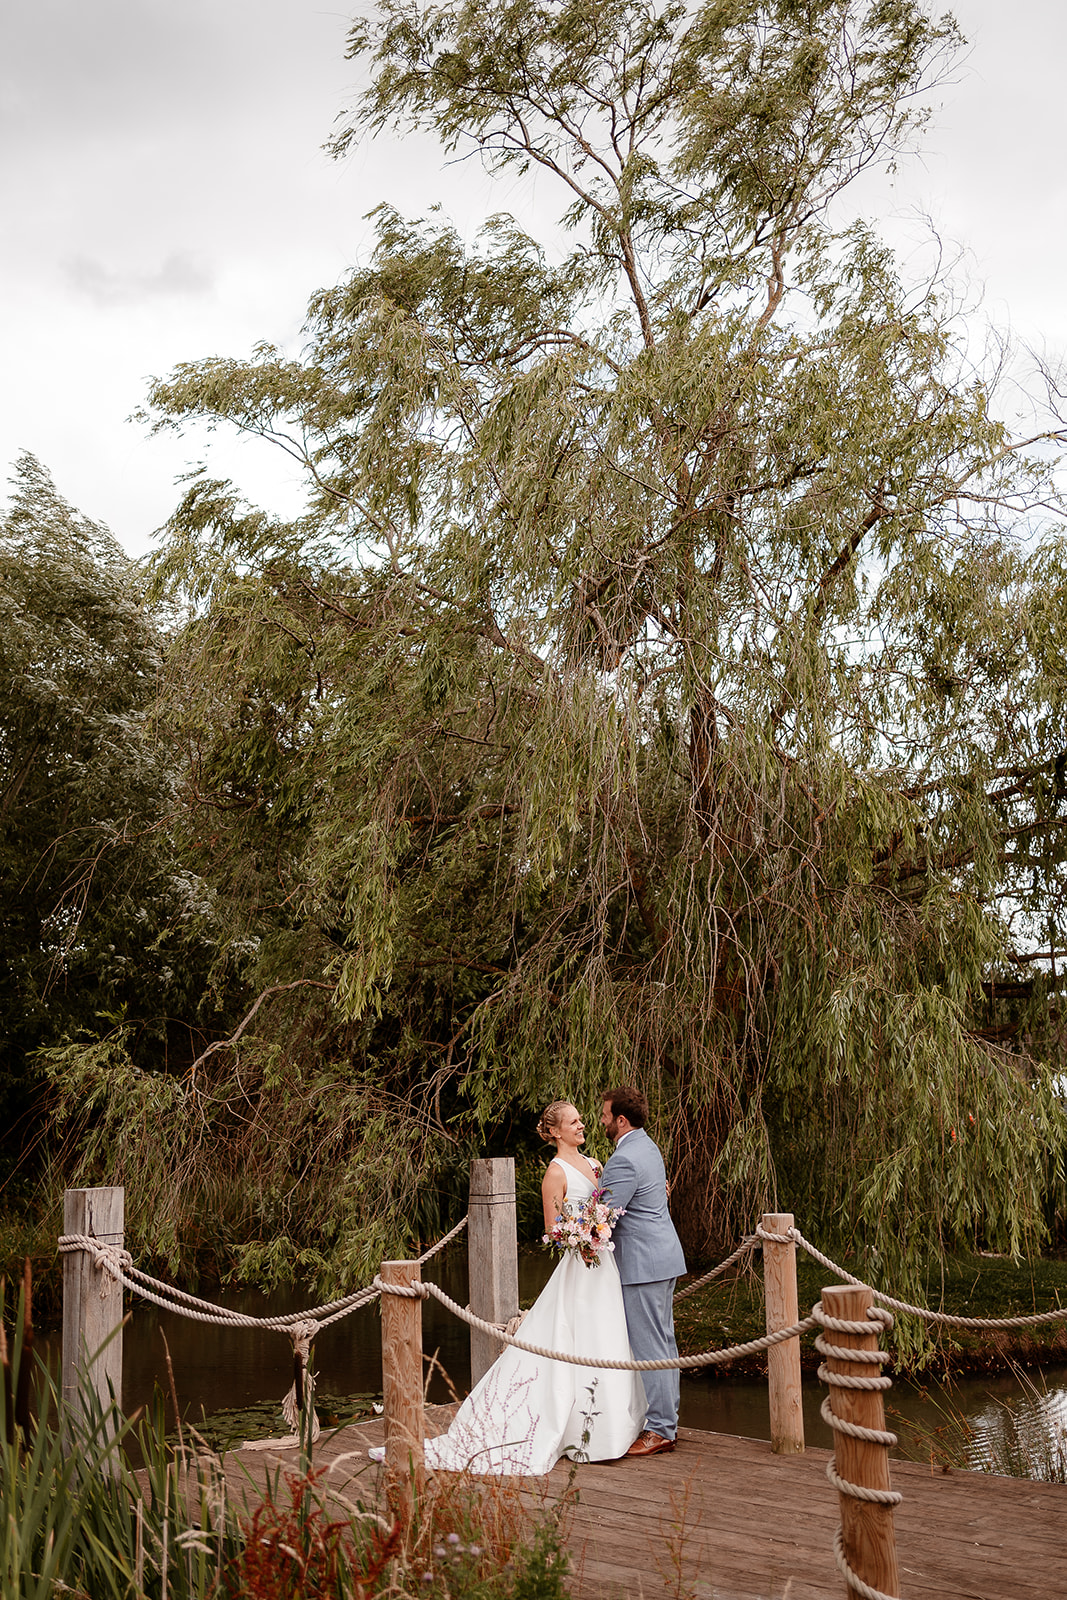 Portrait photo of the bride and groom cuddling by the willow tree at a summer wedding at Silchester Farm